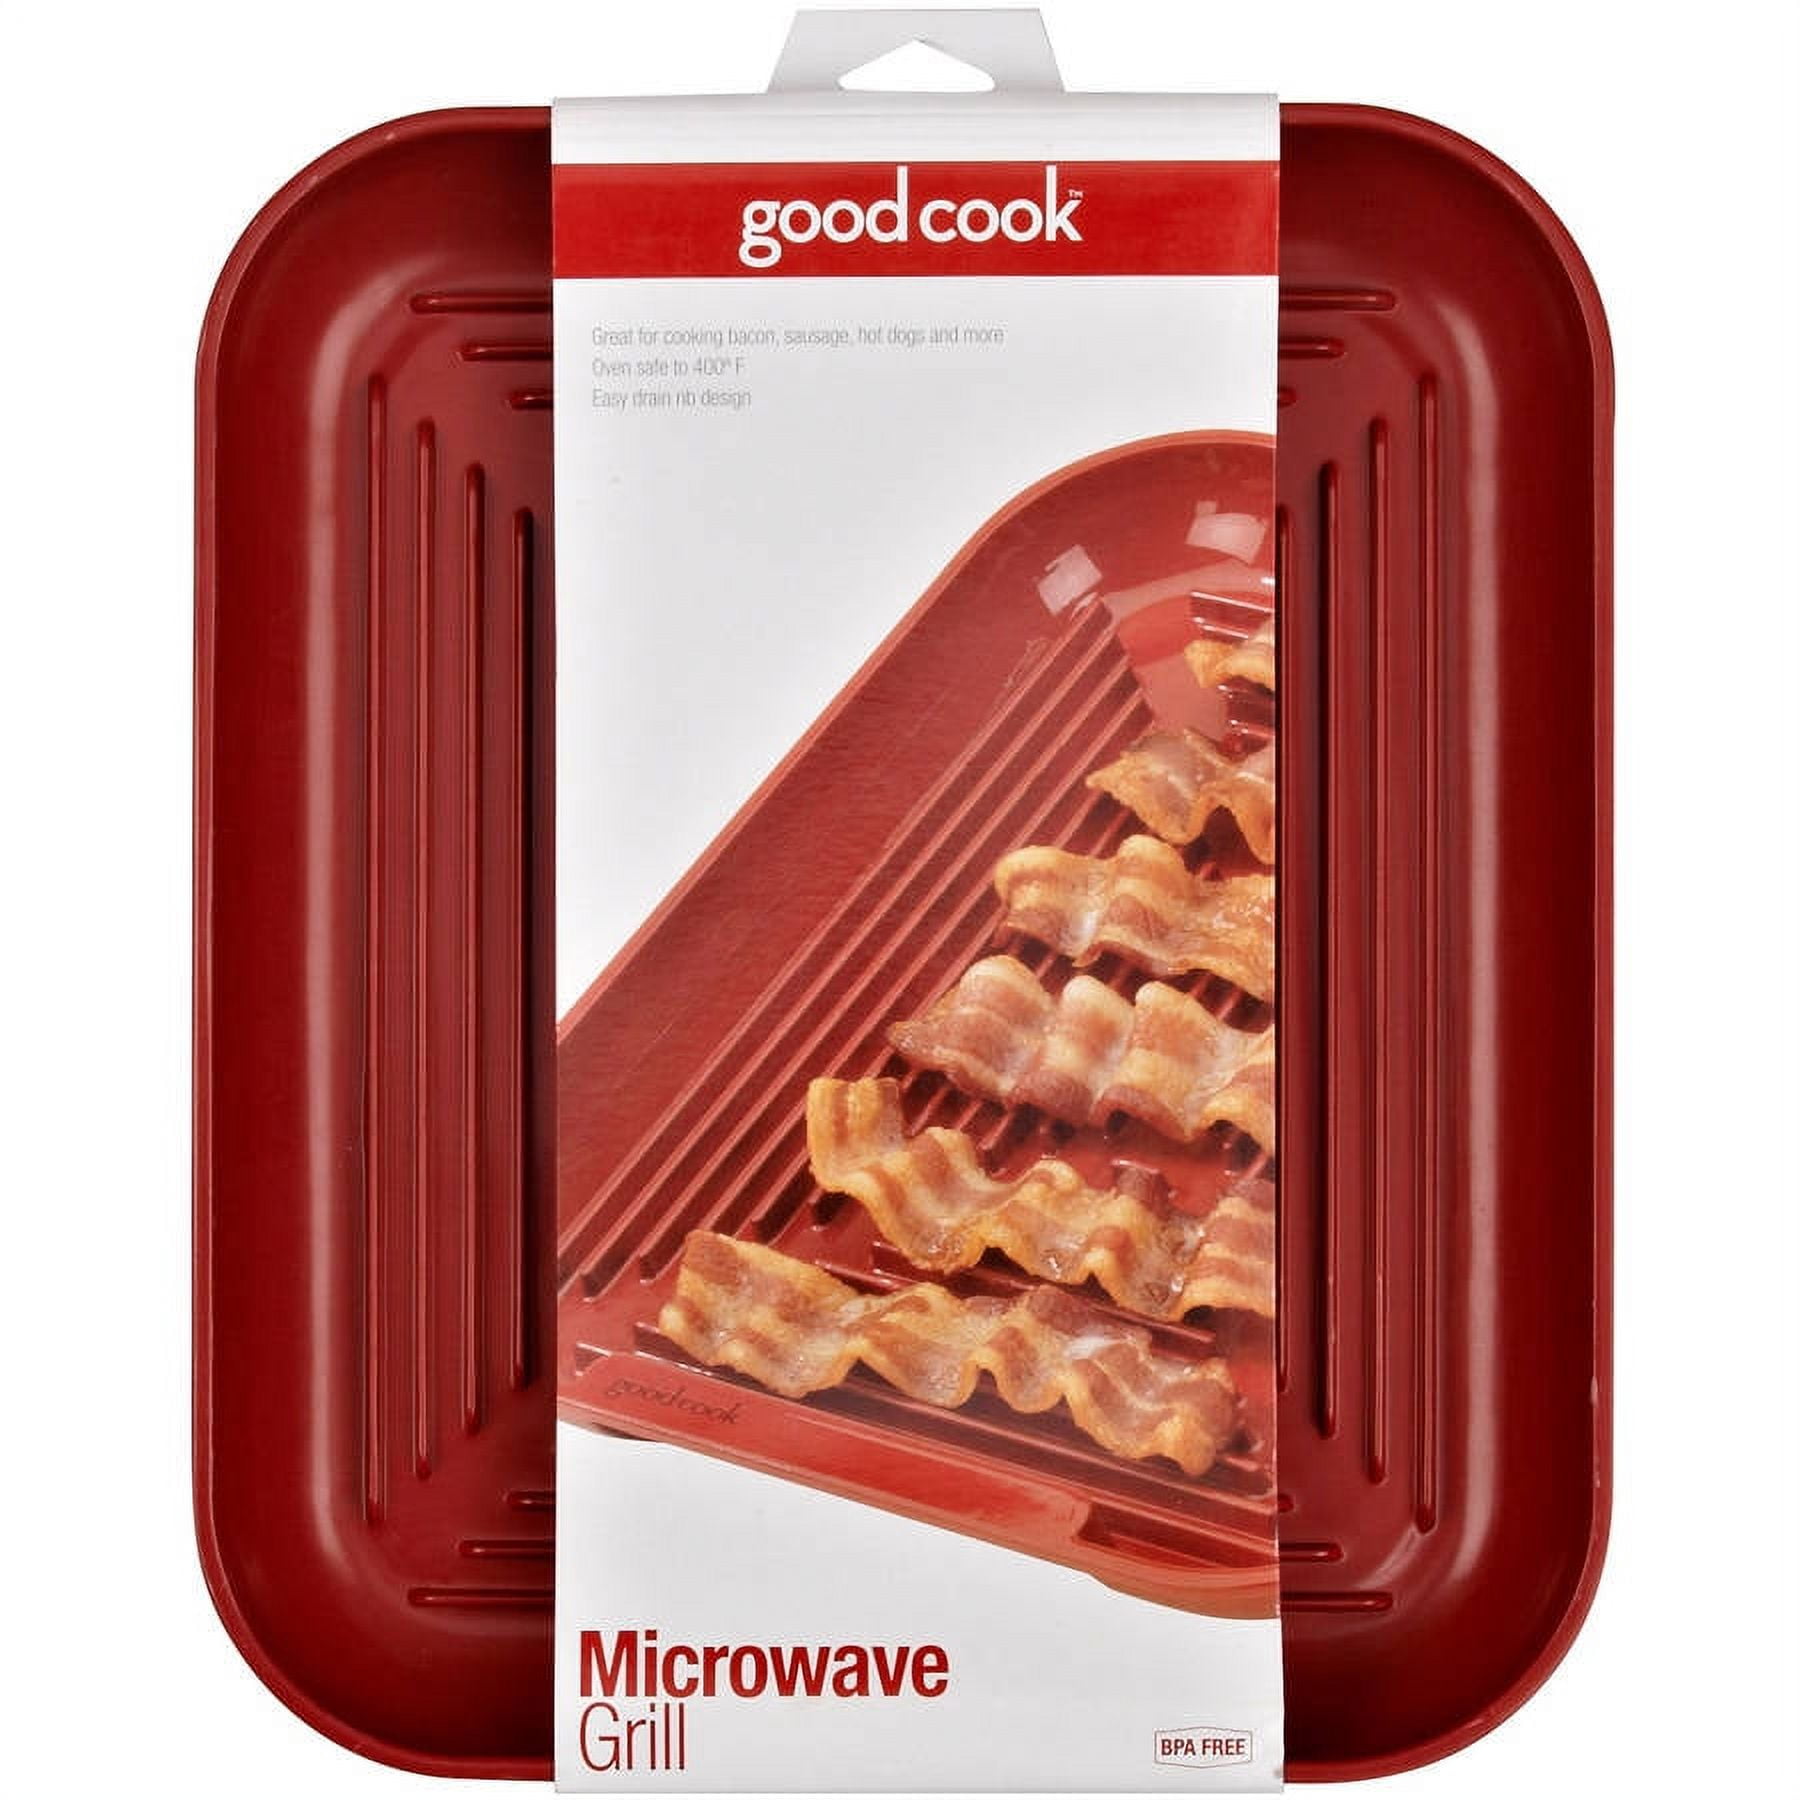 Nordicware Microwave Safe Meal Plates, Set of 2 – The Cook's Nook